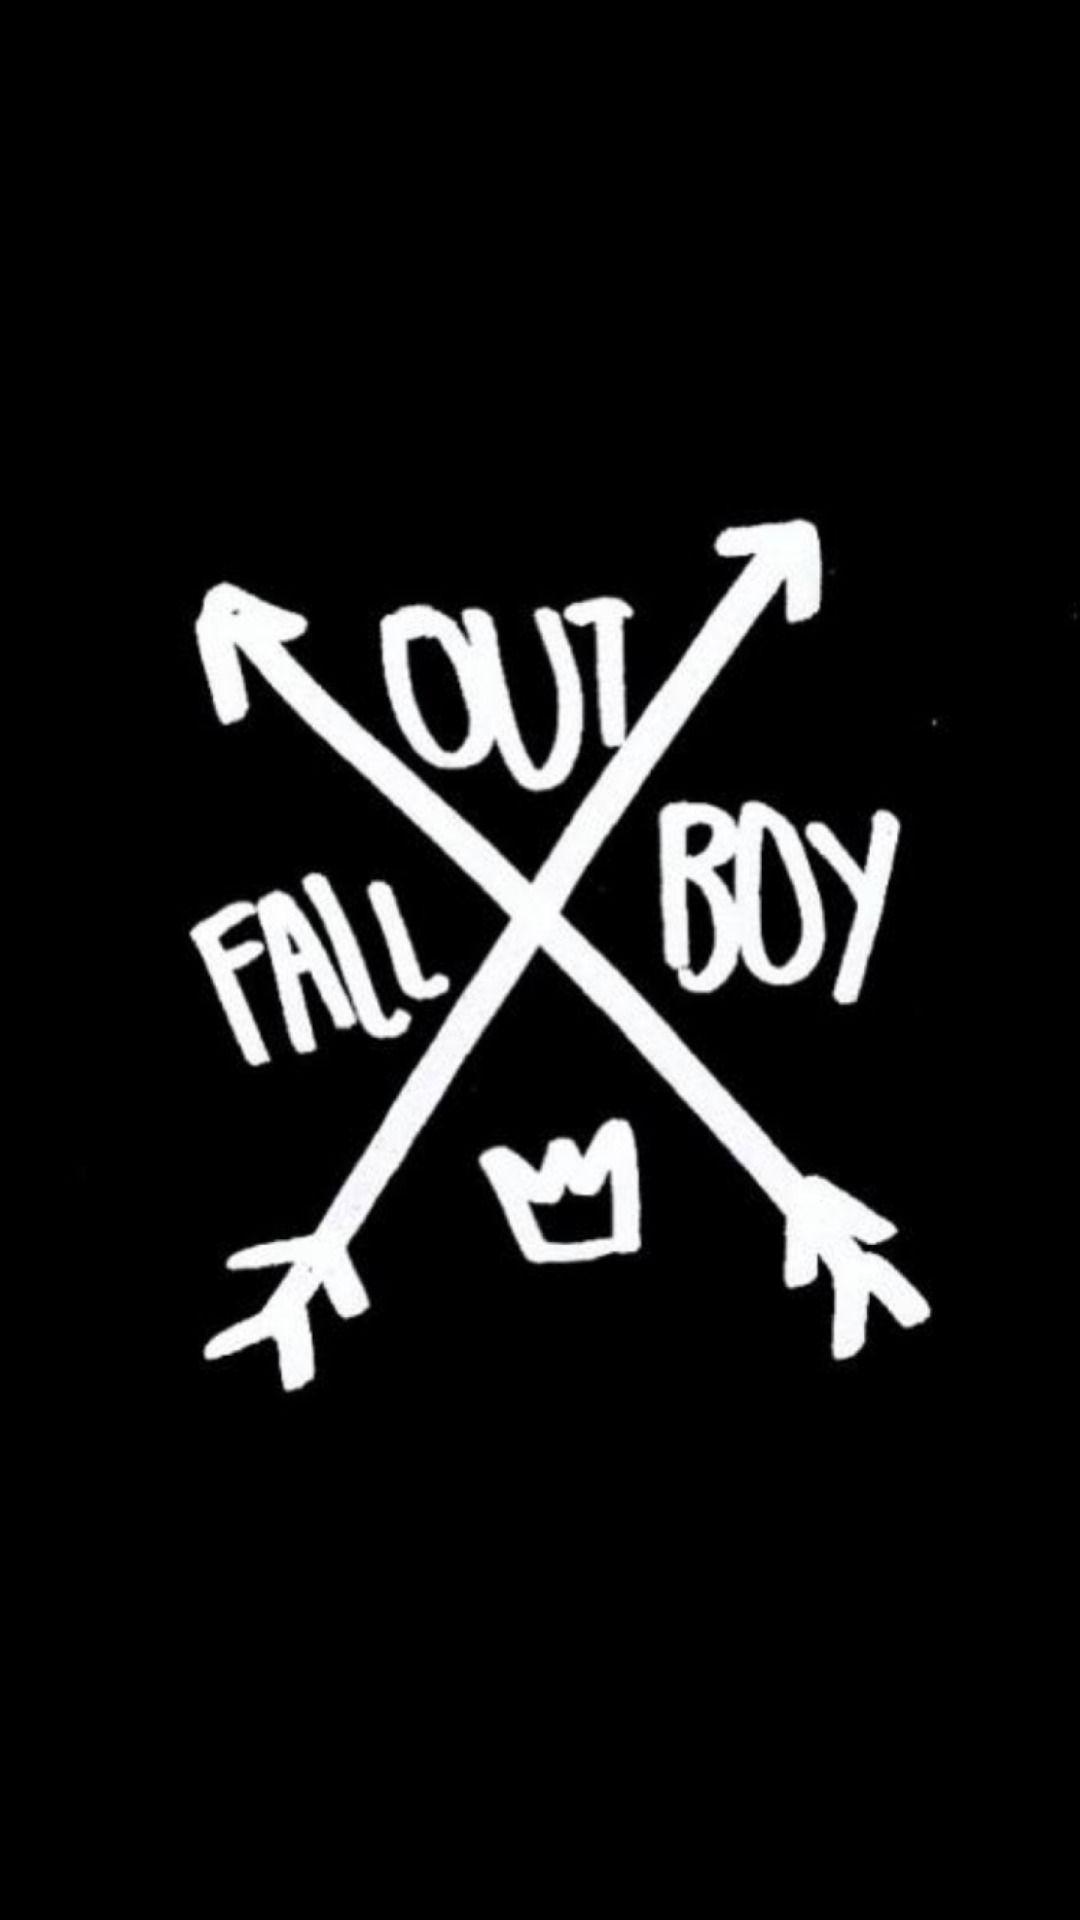 Fall Out Boy Logo - Fall Out Boy Logo Wallpapers - Wallpaper Cave